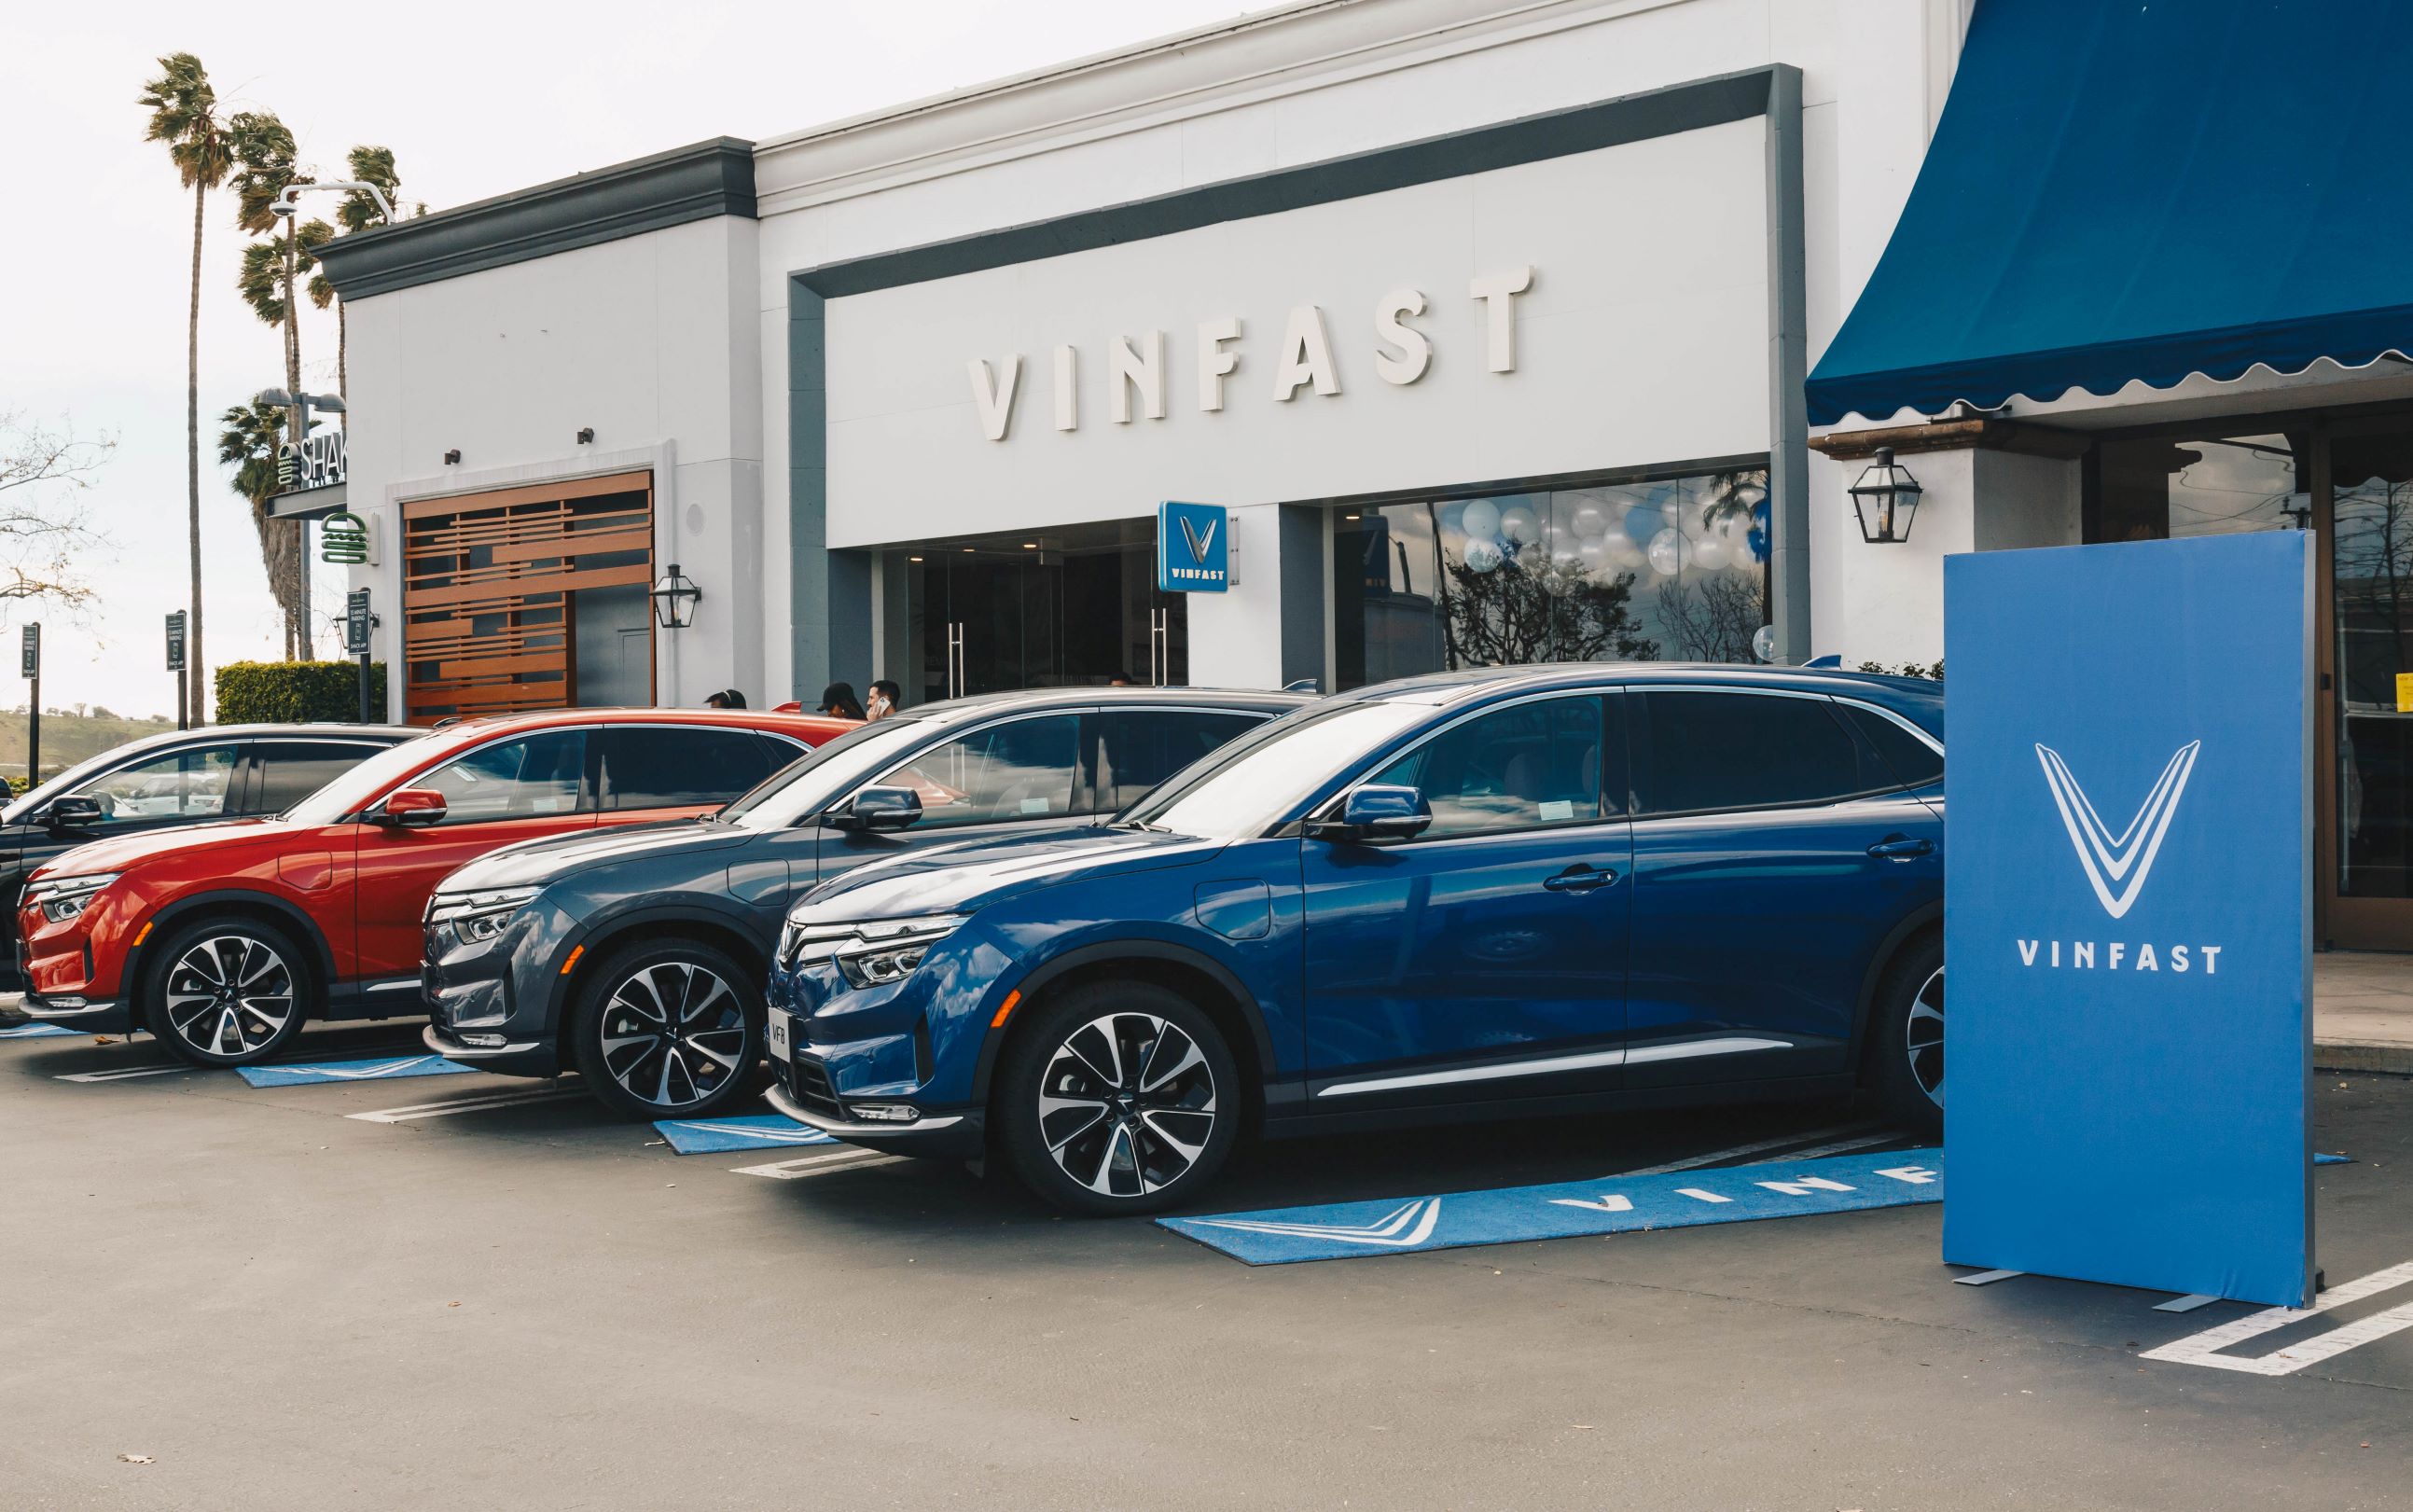 VINFAST OFFICIALLY DELIVERS FIRST VF 8 CITY EDITION VEHICLES TO U.S. CUSTOMERS